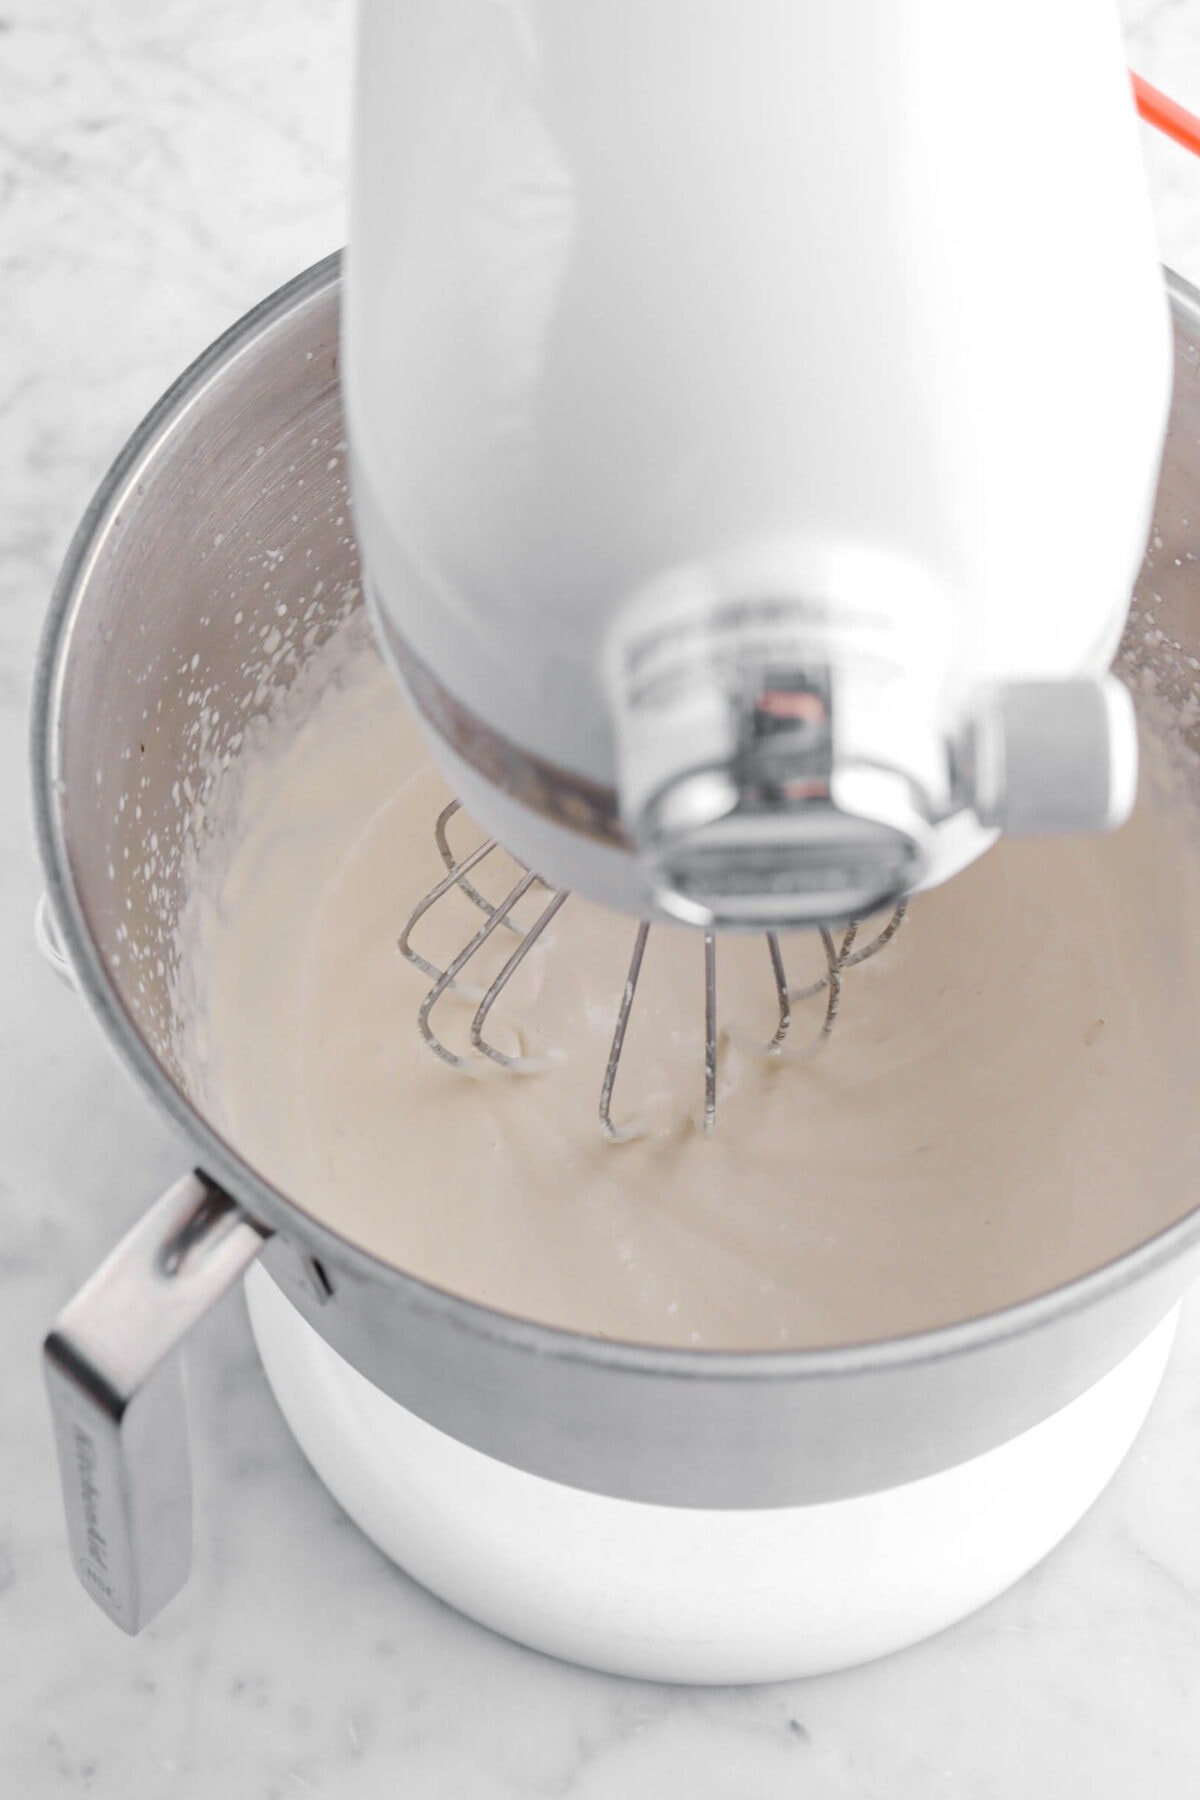 chantilly cream in stand mixer.